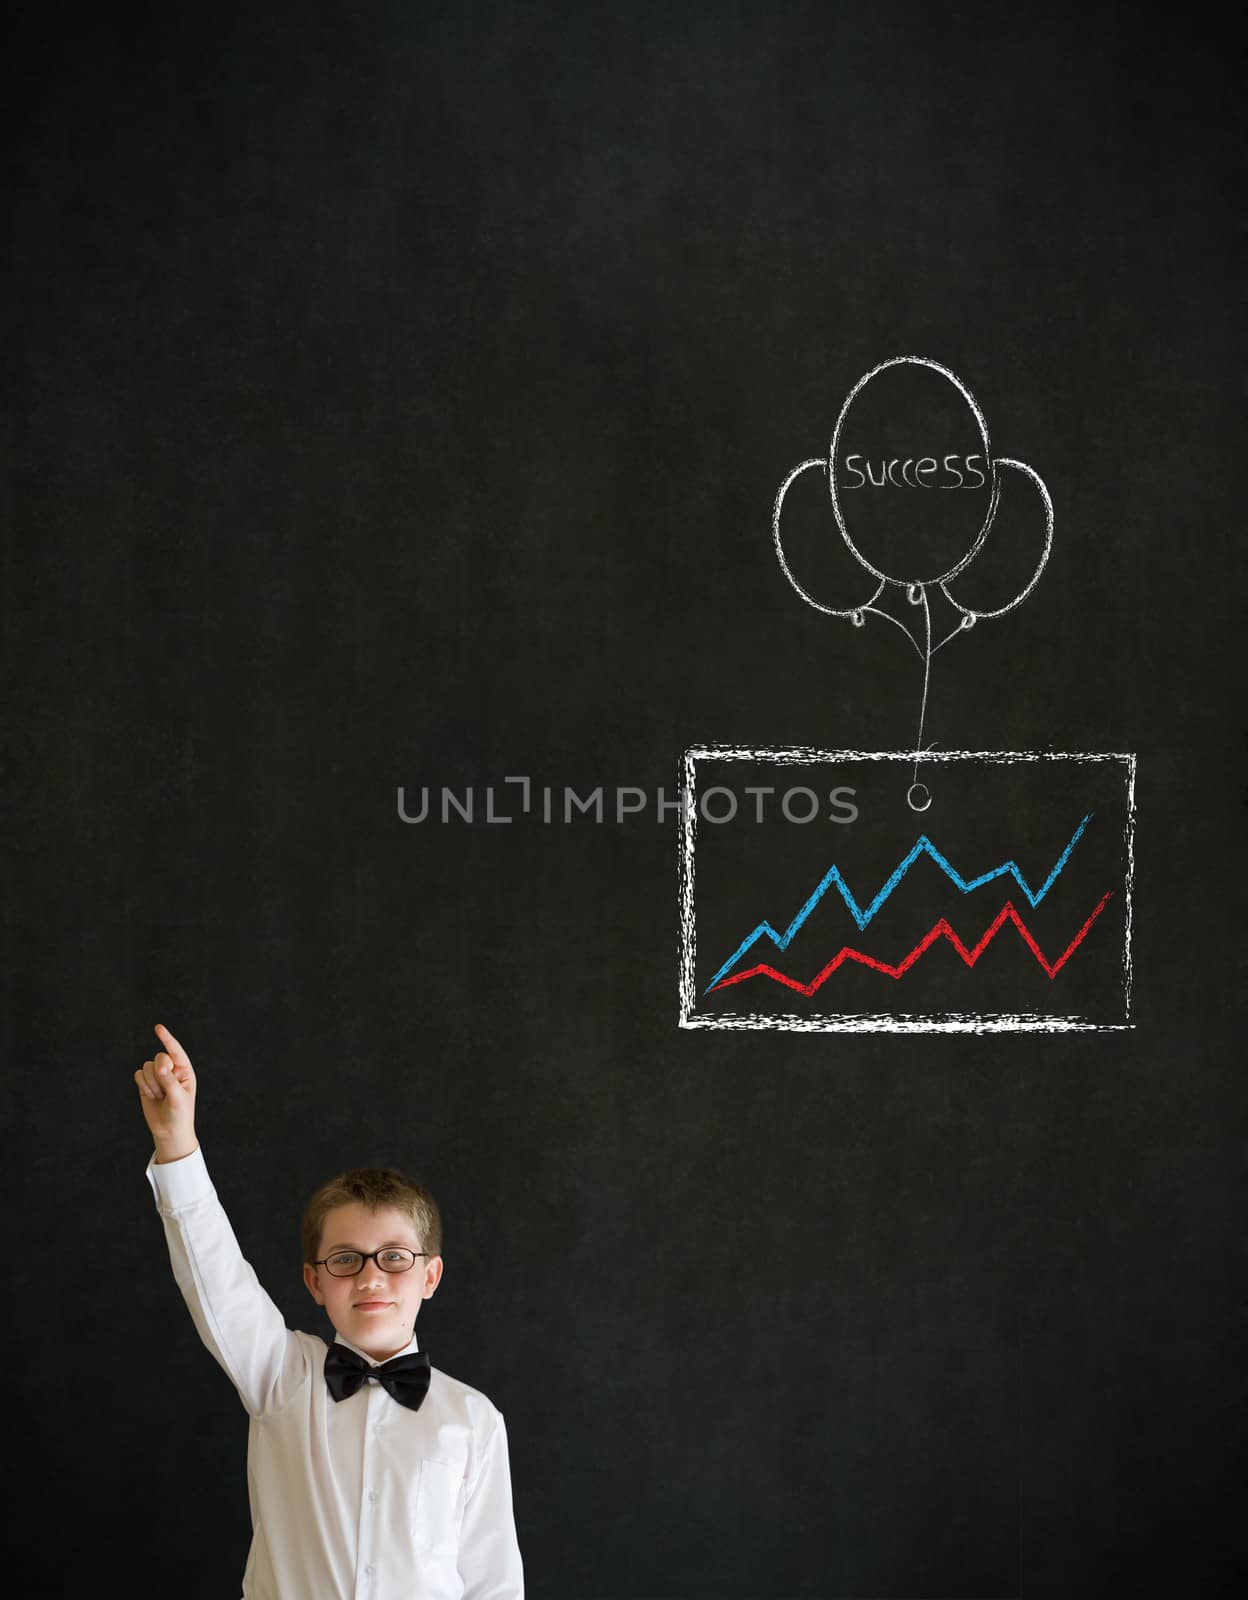 Hand up answer boy dressed up as business man with chalk success graph and balloon on blackboard background